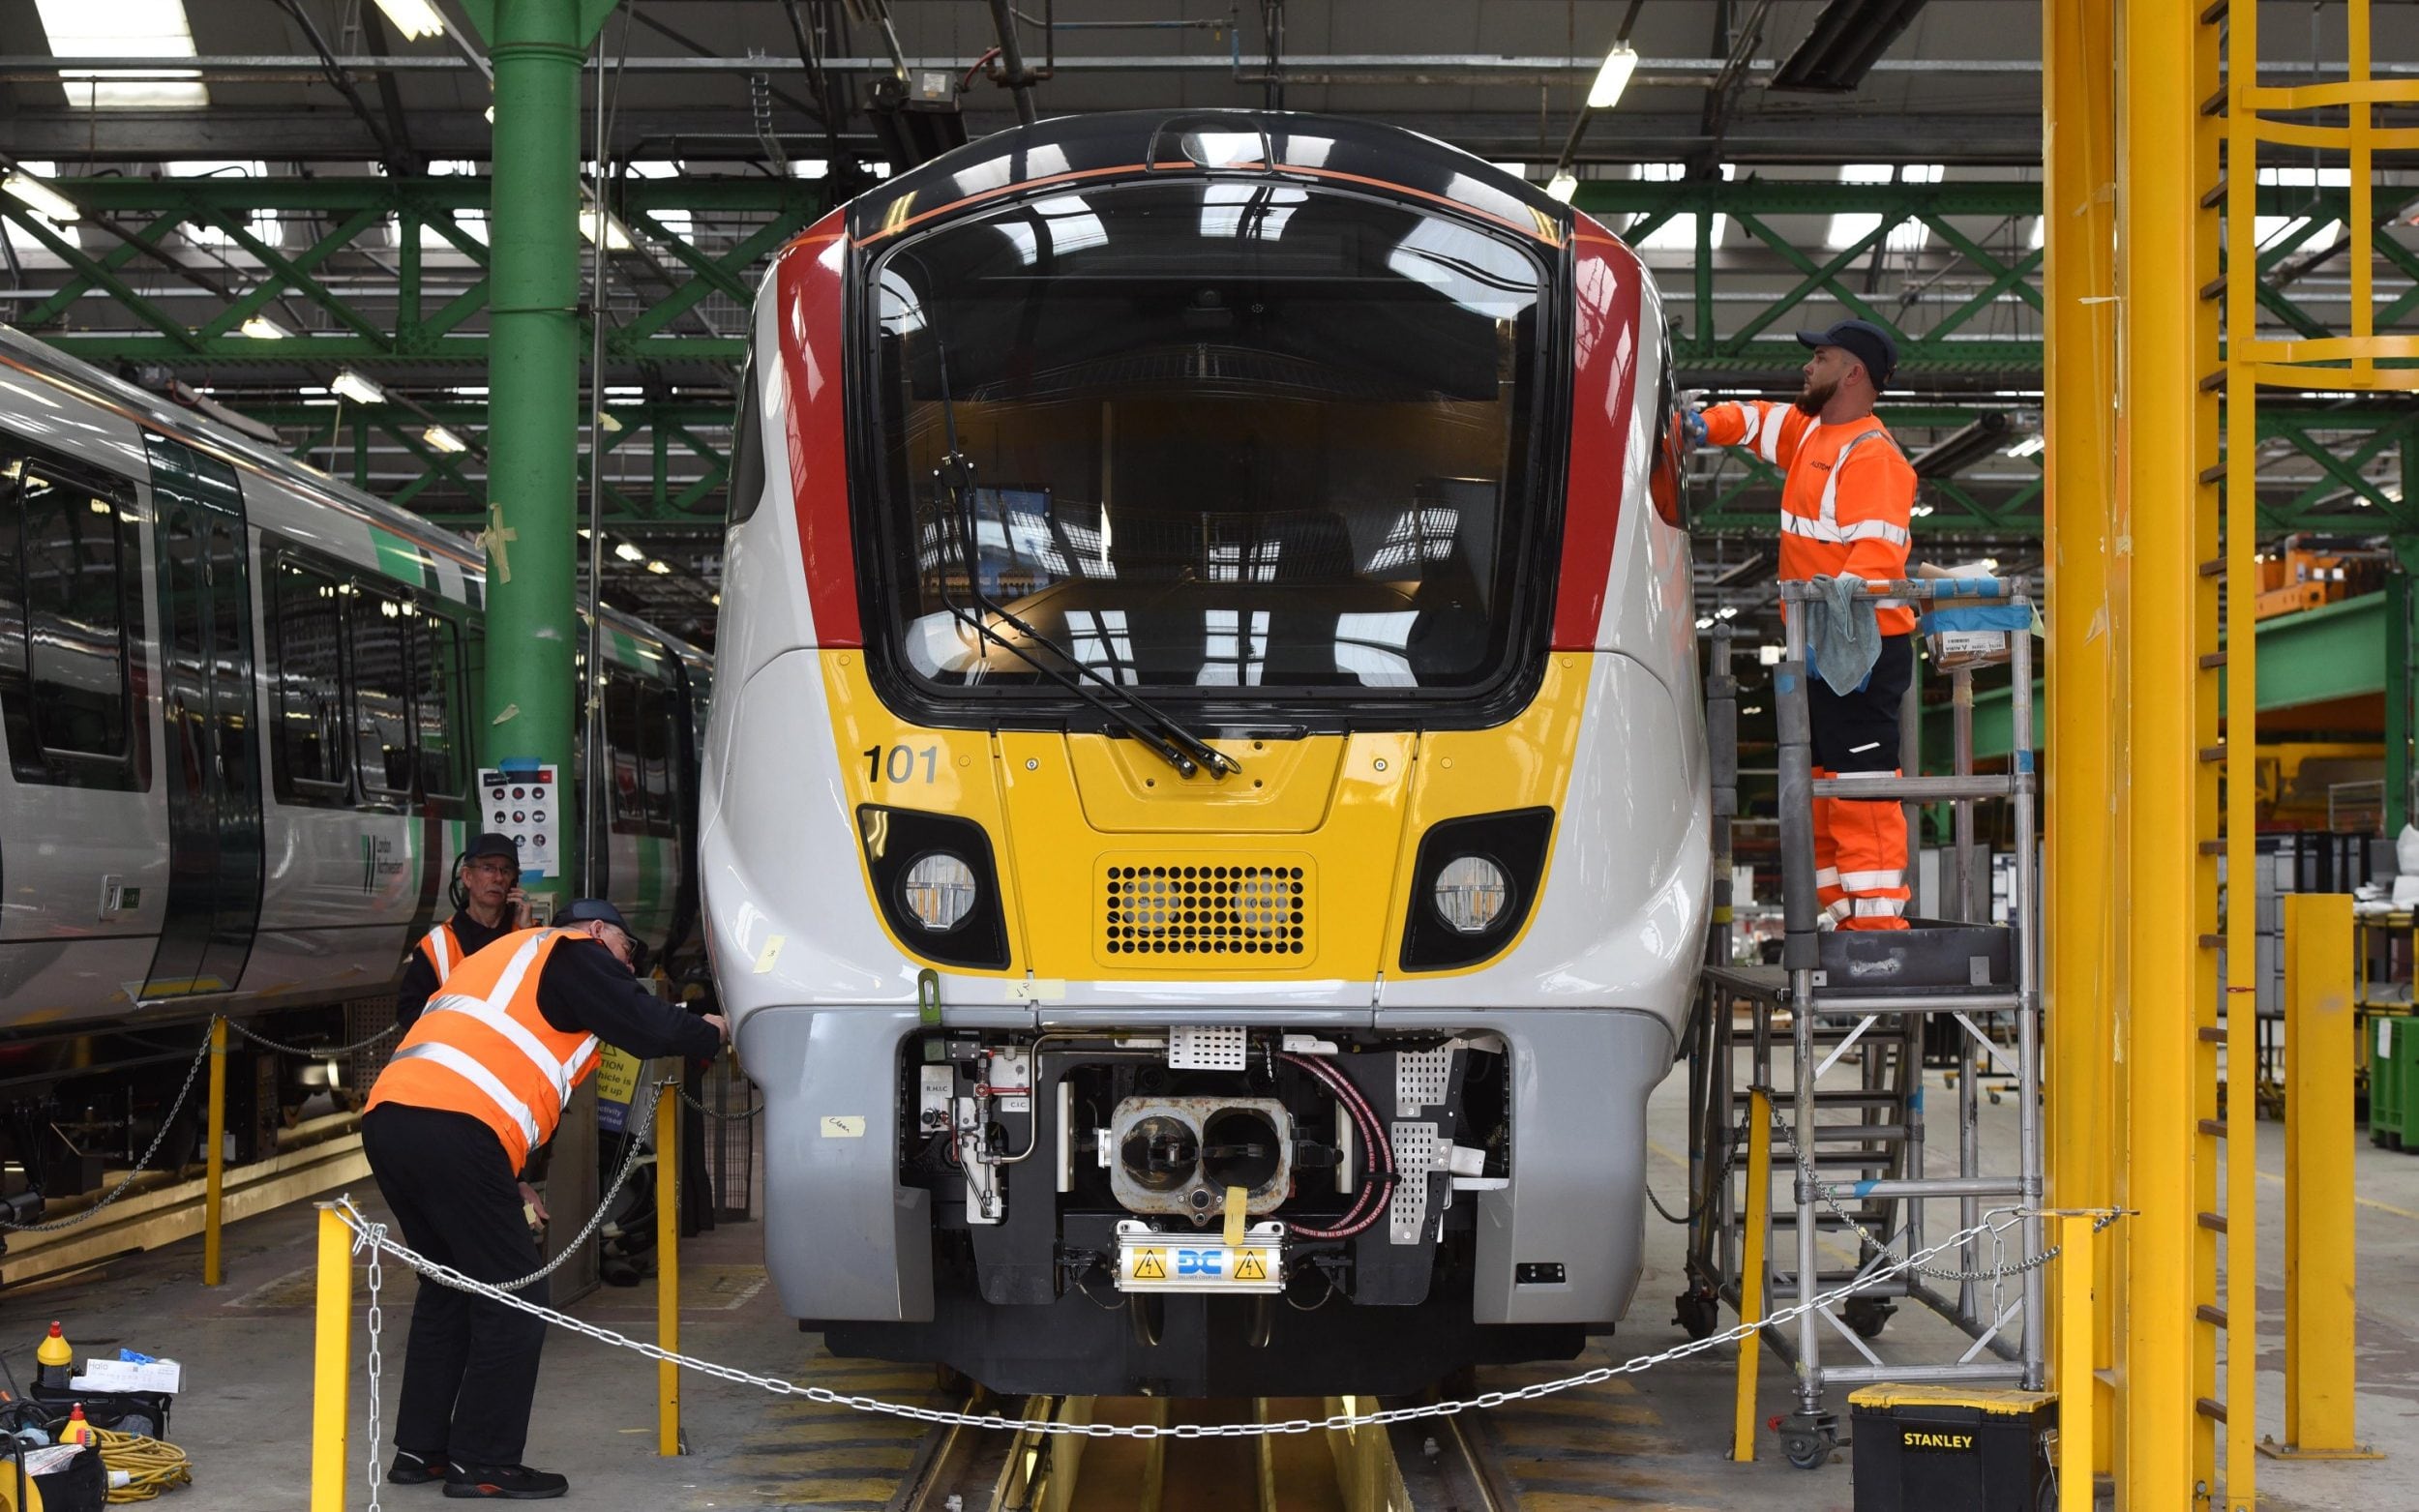 funding for new elizabeth line trains saves 1,200 jobs at uk’s biggest rail factory